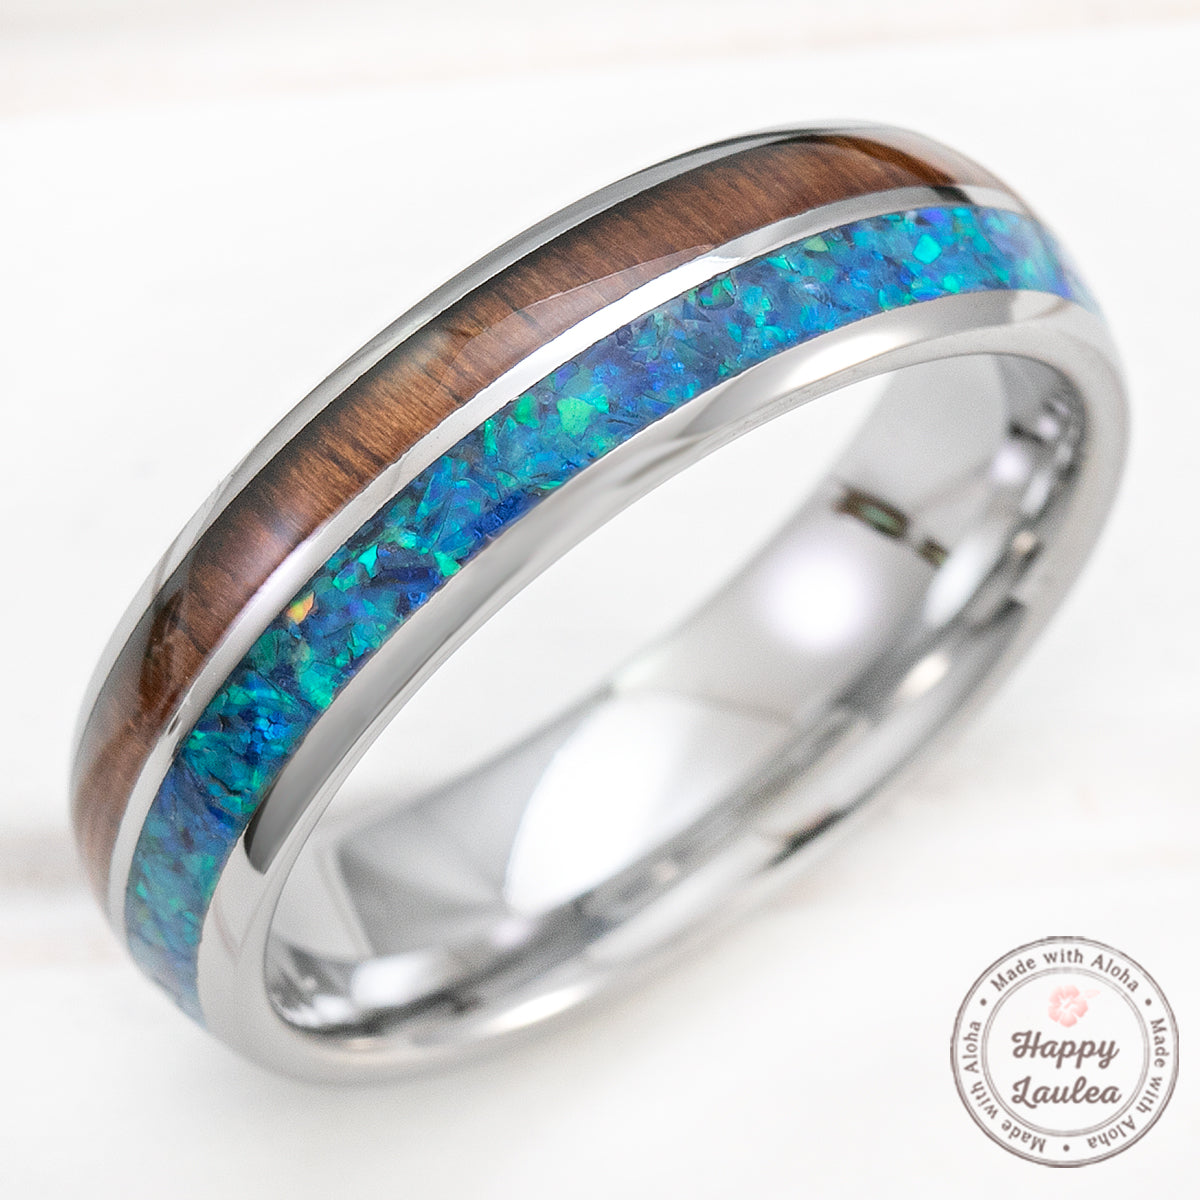 Tungsten Carbide 6mm Ring with Azure Opal & Koa Wood Duo-Inlay - Dome Shape, Comfort Fitment